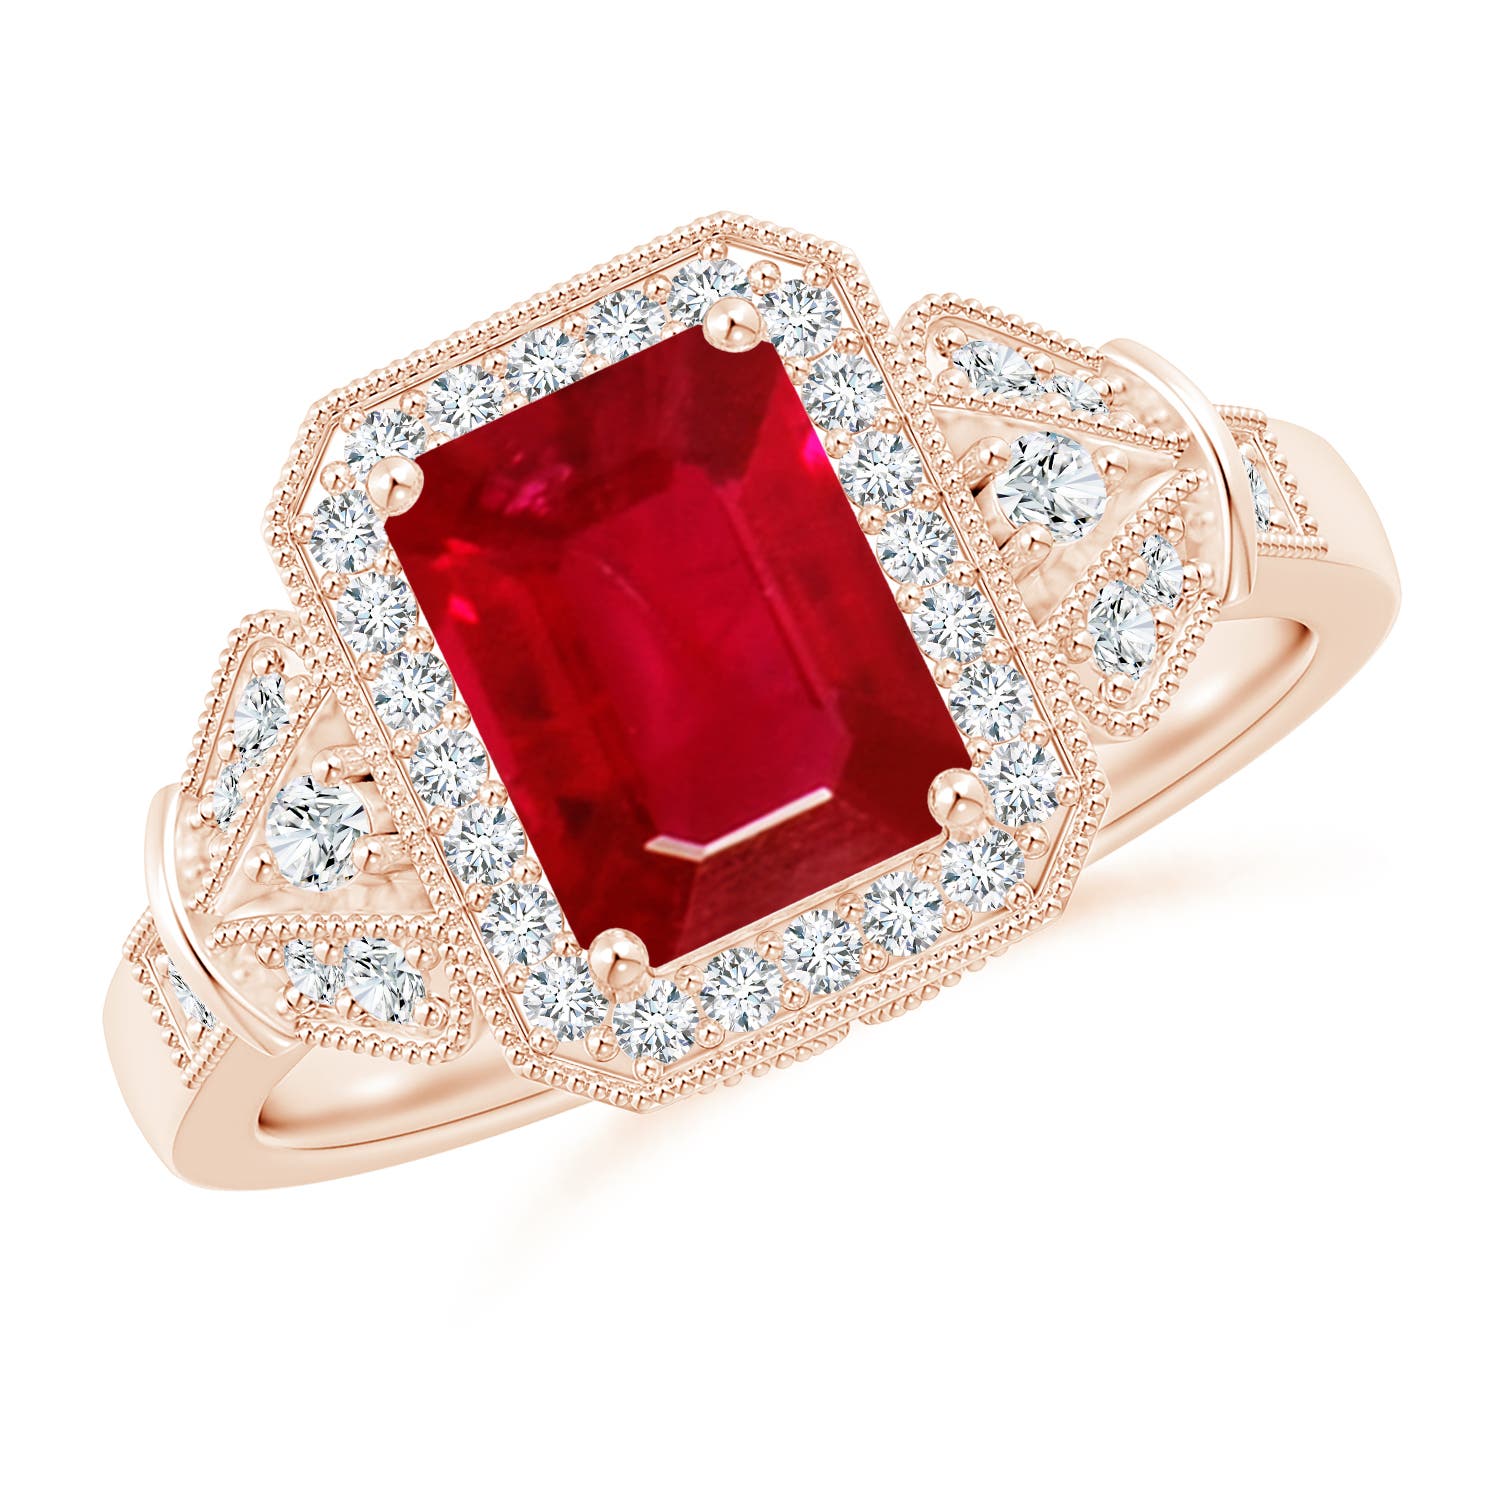 Aeon Vintage Style Emerald-Cut Ruby Halo Engagement Ring with Milgrain